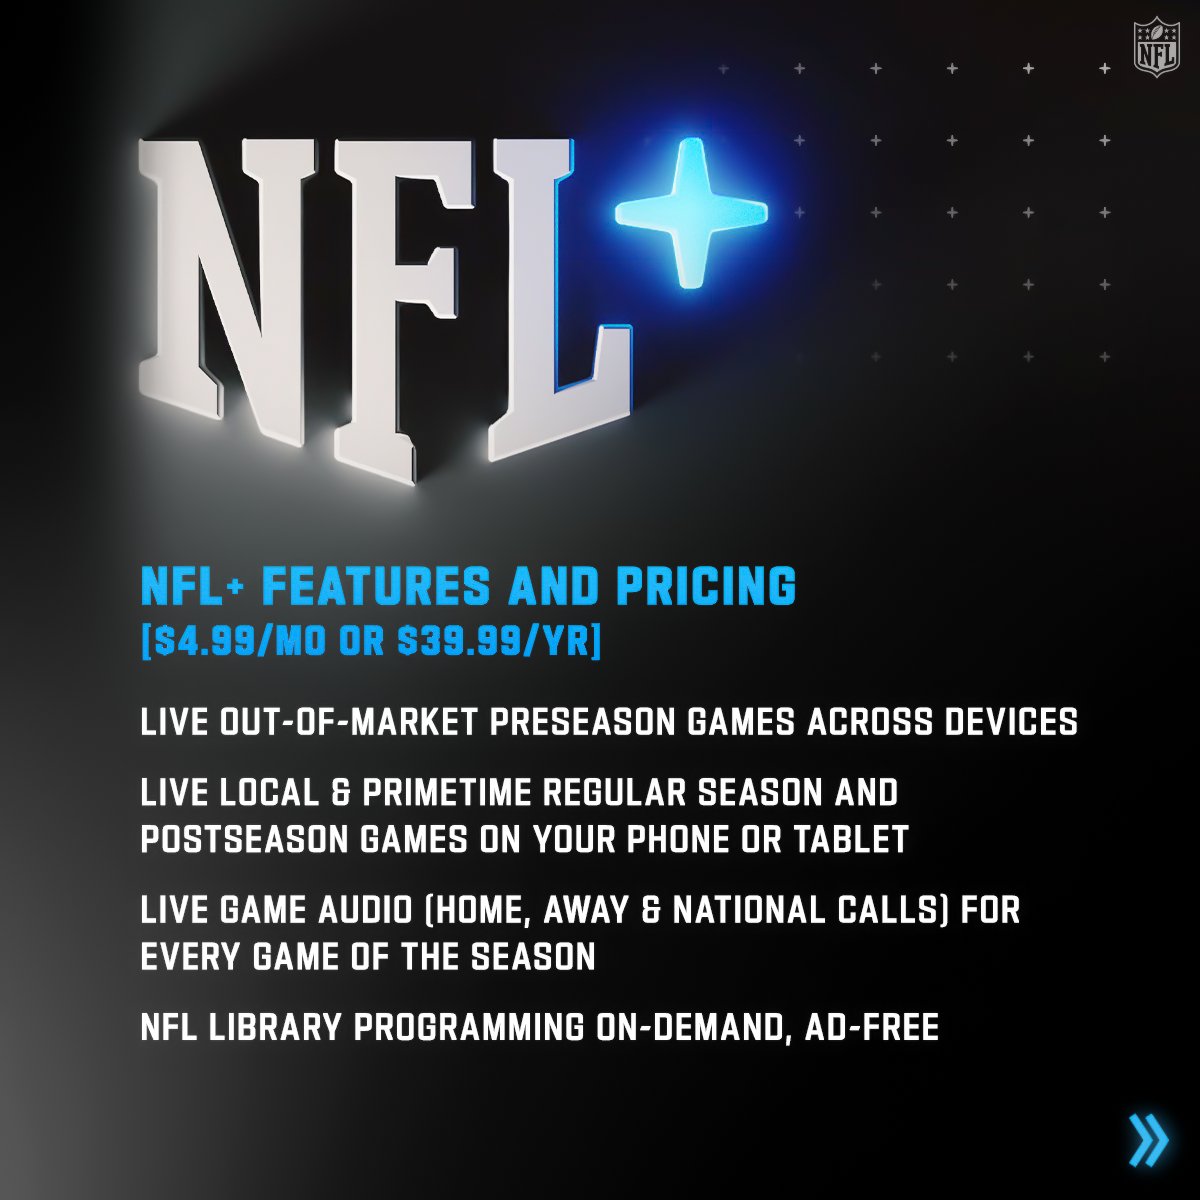 How to watch NFL Plus in 2023: What does NFL+ premium subscription cost,  include? Is there a free trial? 